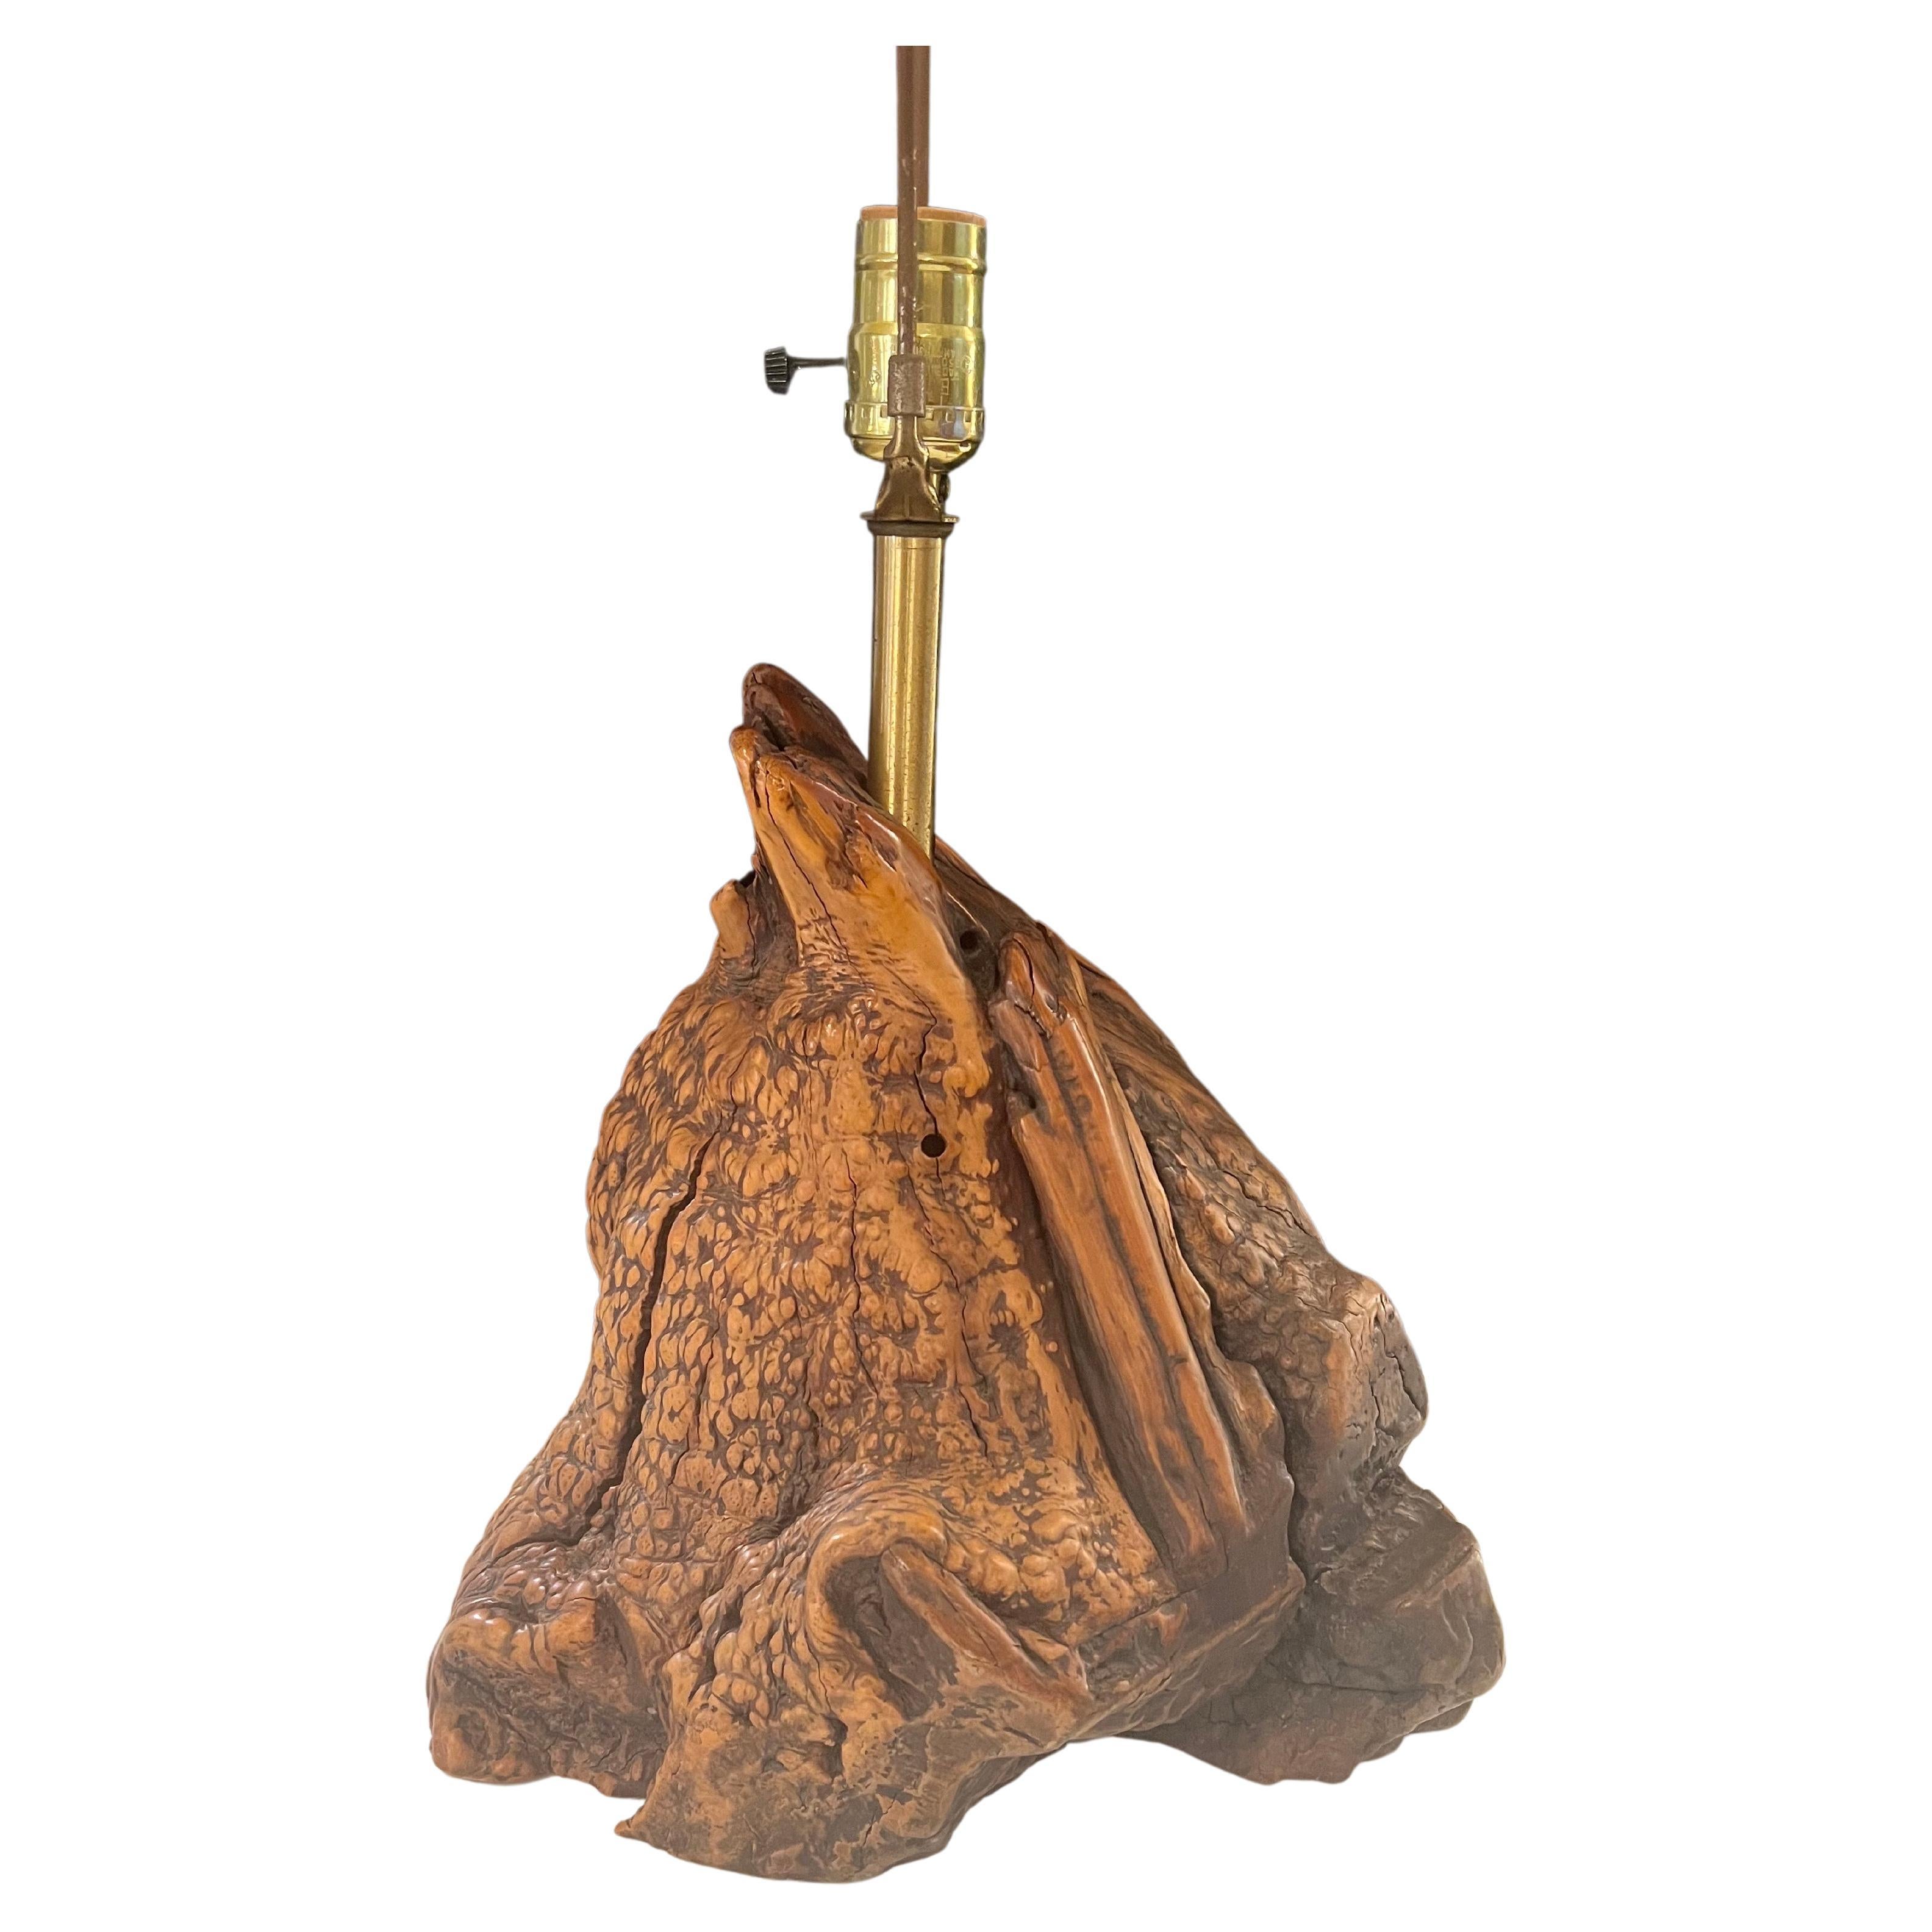 Striking burl wood table lamp with brass fittings, circa the 1970s, nice working condition lamp shade is not included. It is 16